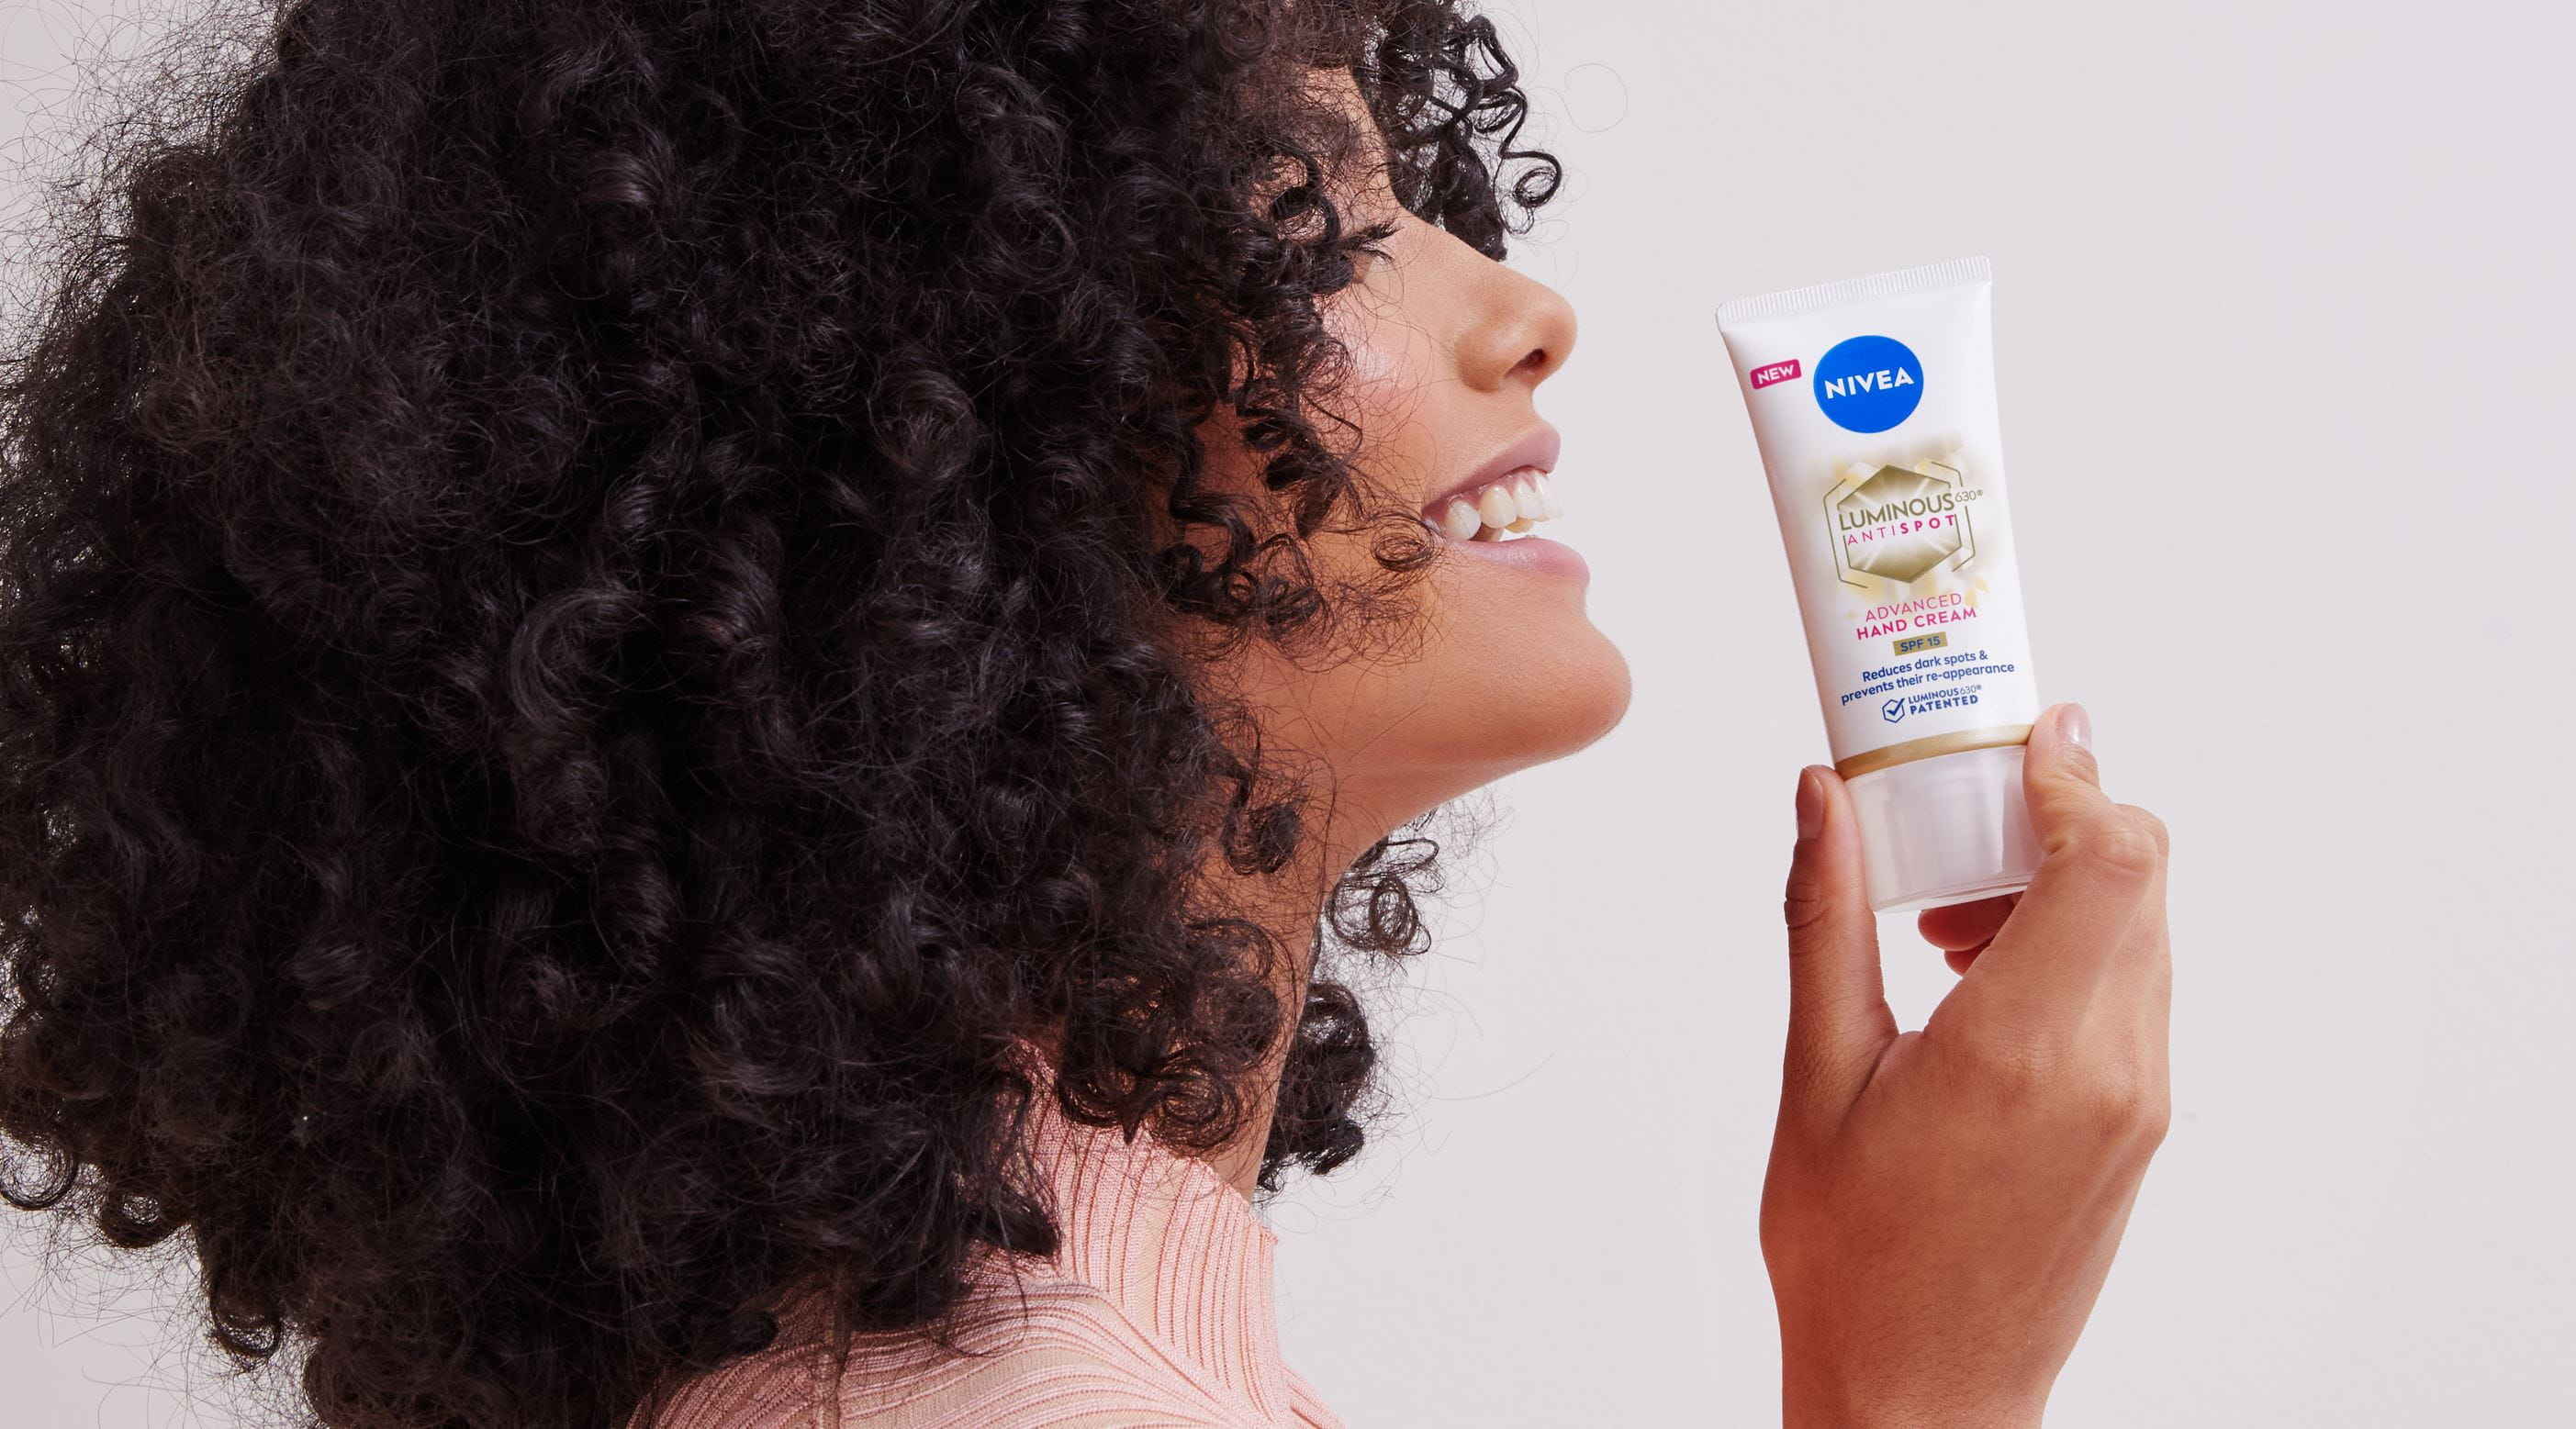 girl with curly hair holding a Nivea hand cream